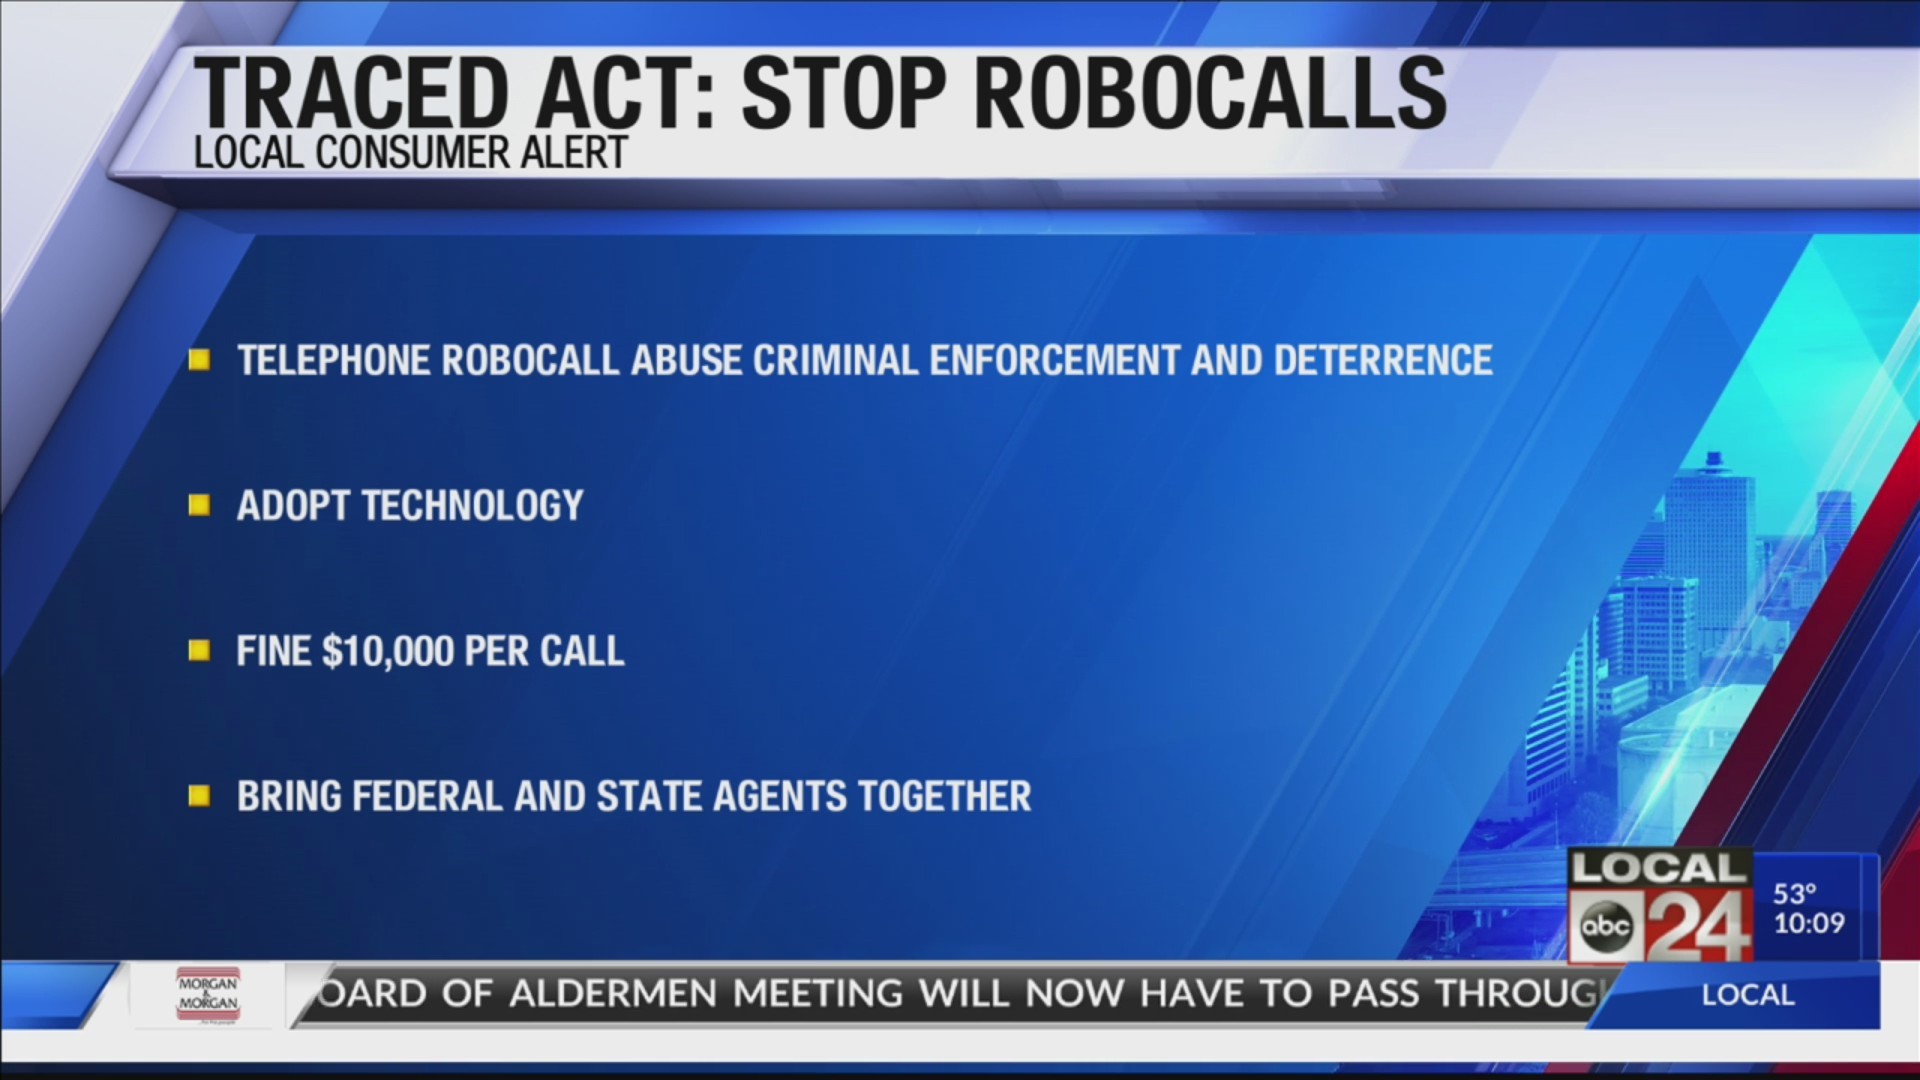 Mid-South Lawmaker Introduces TRACED Act To Stop Robocalls